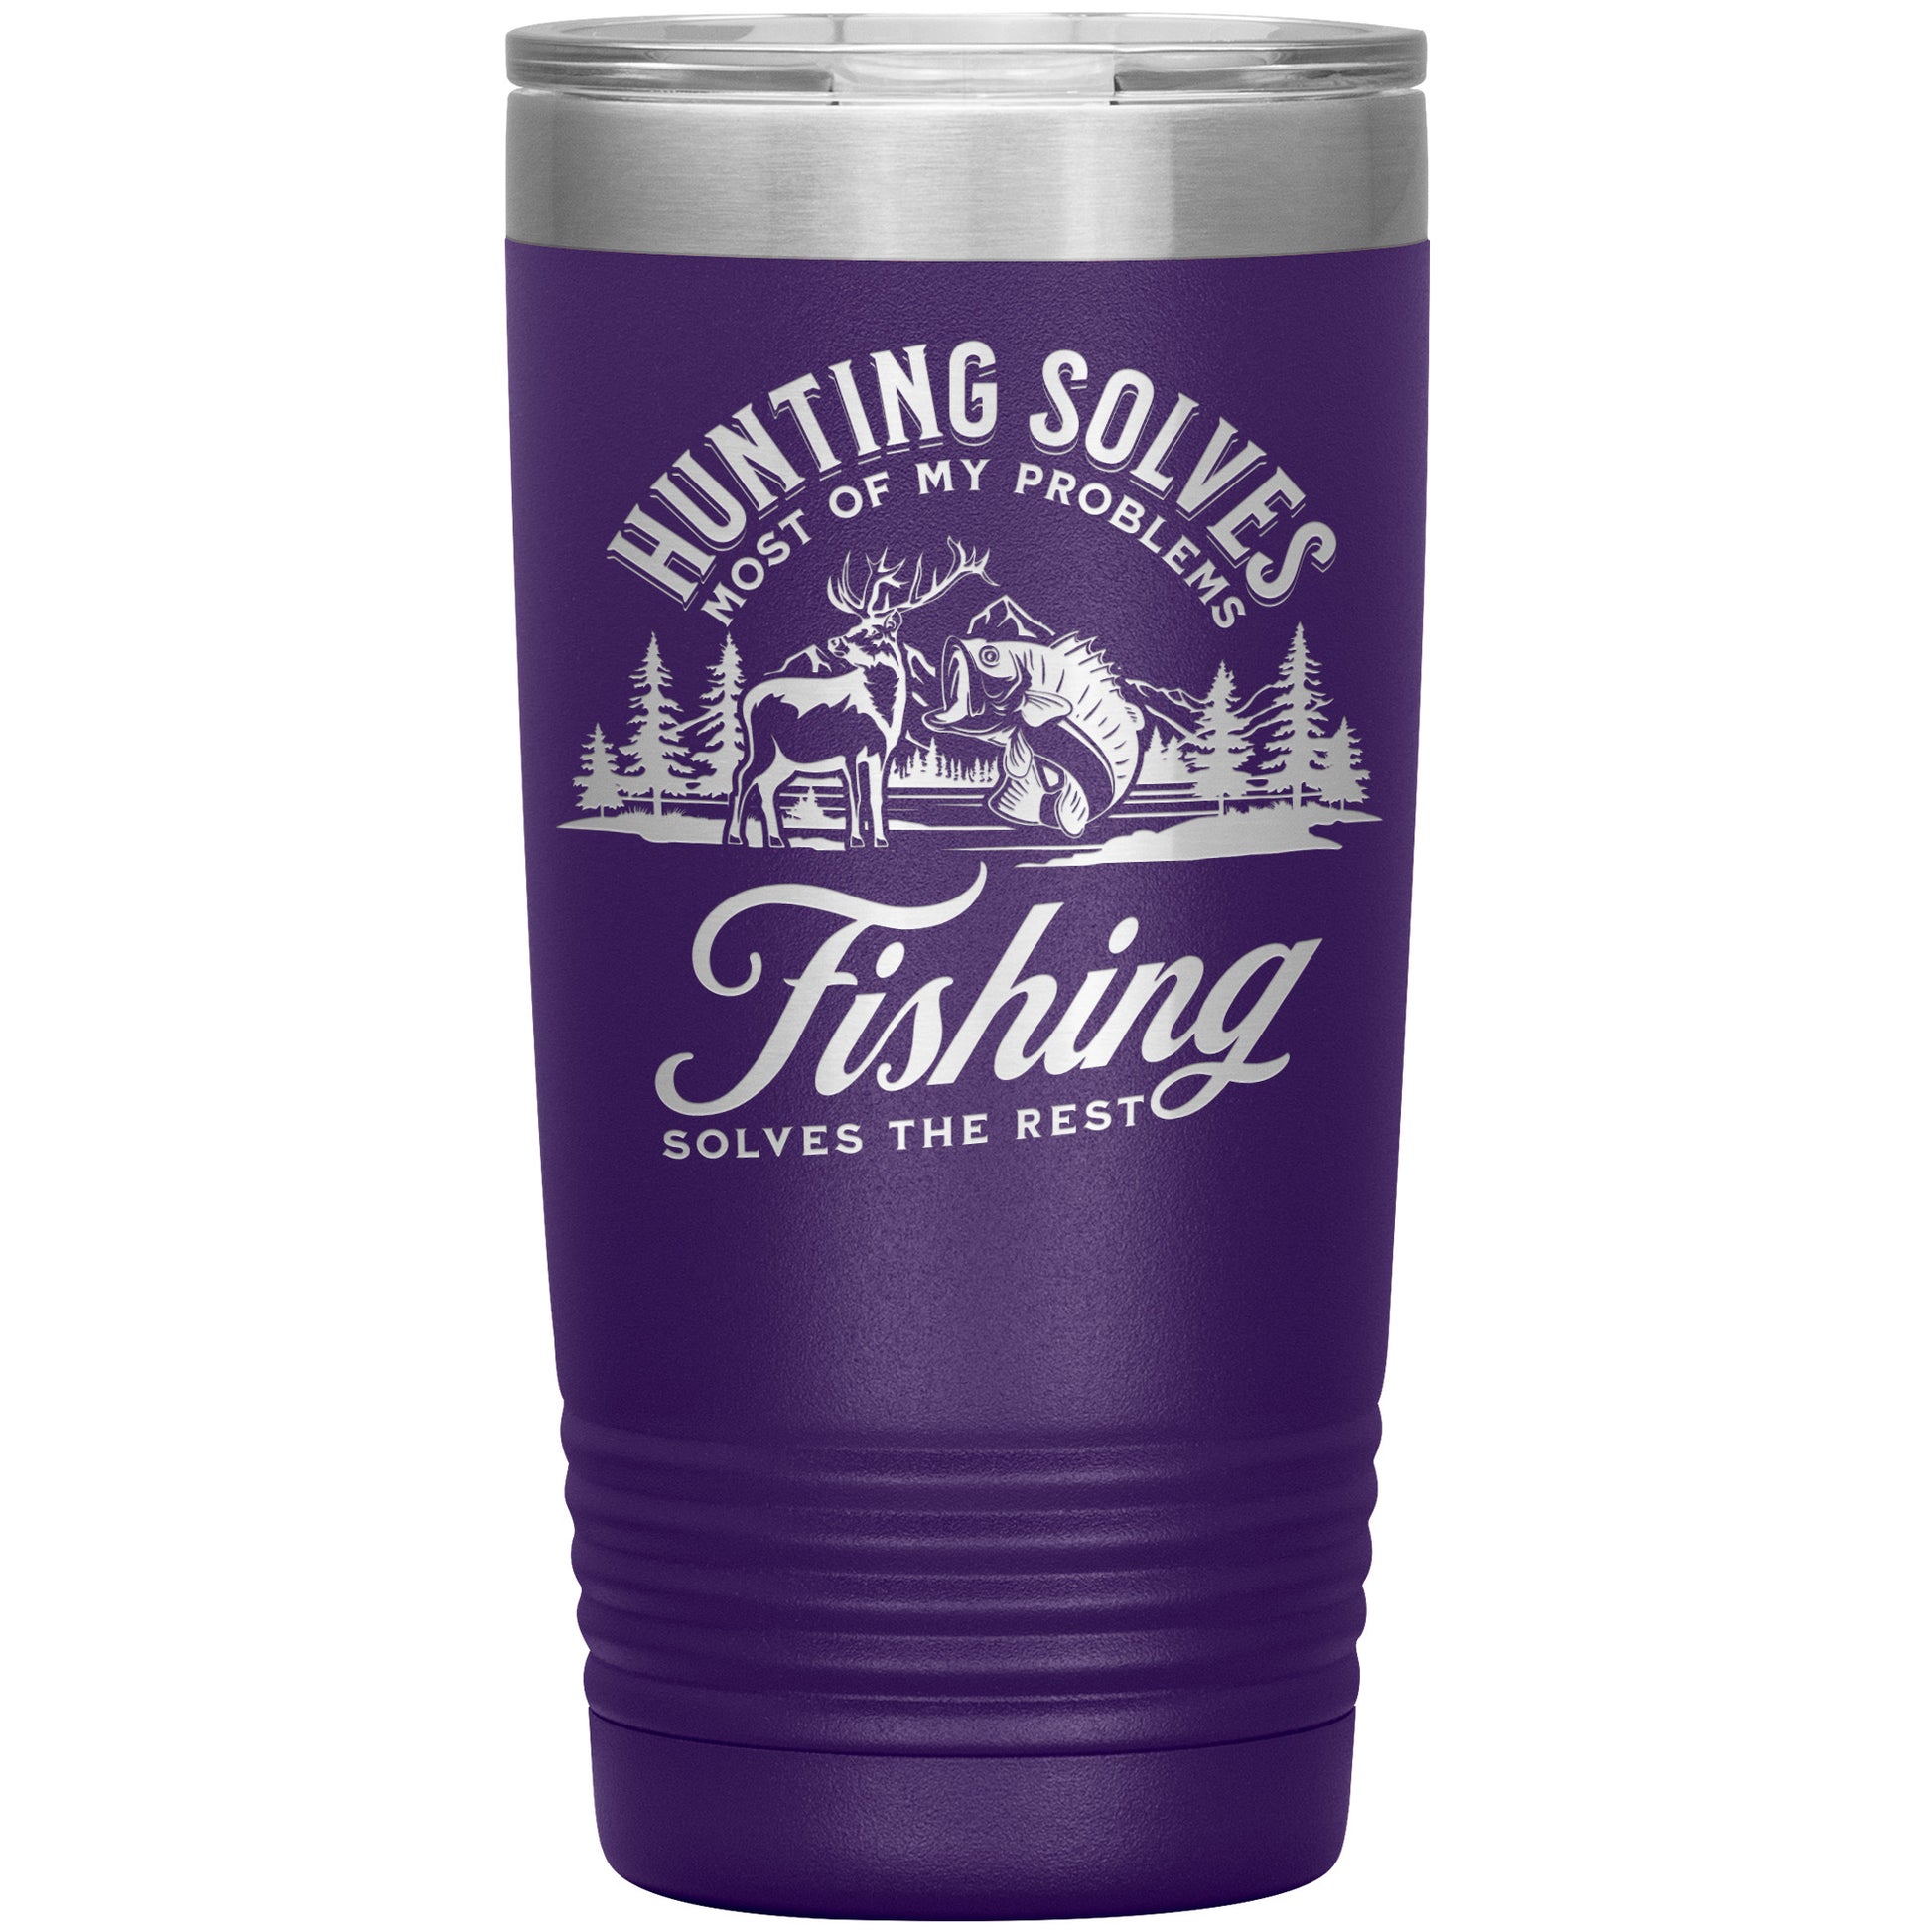 Outdoors tumbler, insulated and purple with white text and graphics stating "hunting solves most of my problems, fishing solves the rest," featuring imagery of a hunter, a deer, trees - Hunting Solves Most of My Problems, Fishing Solves the Rest - Laser Etched Tumbler - 20oz